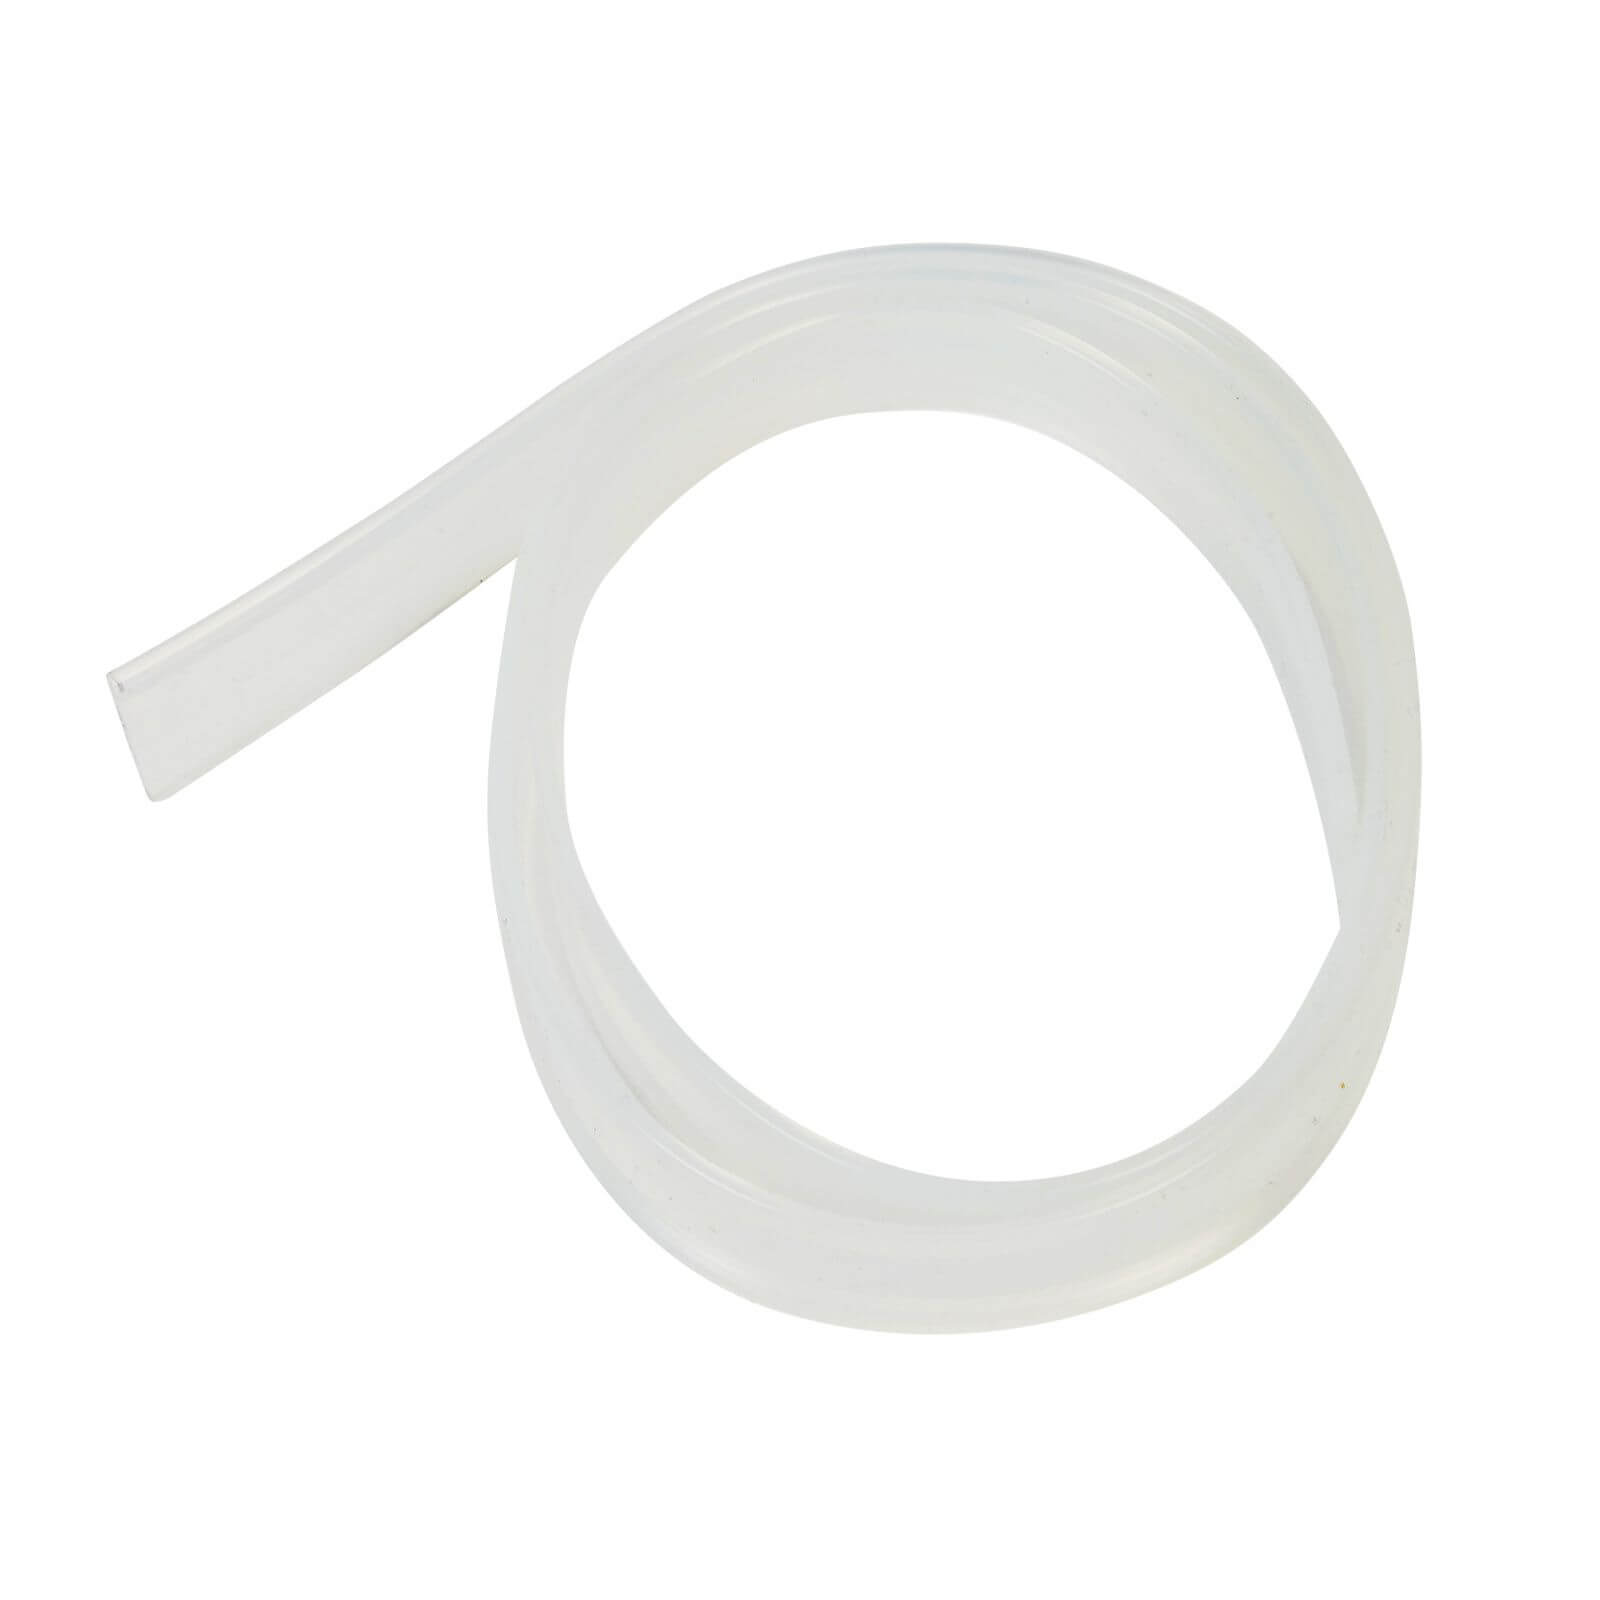 Croydex Replacement Shower Screen Seal 1-8mm